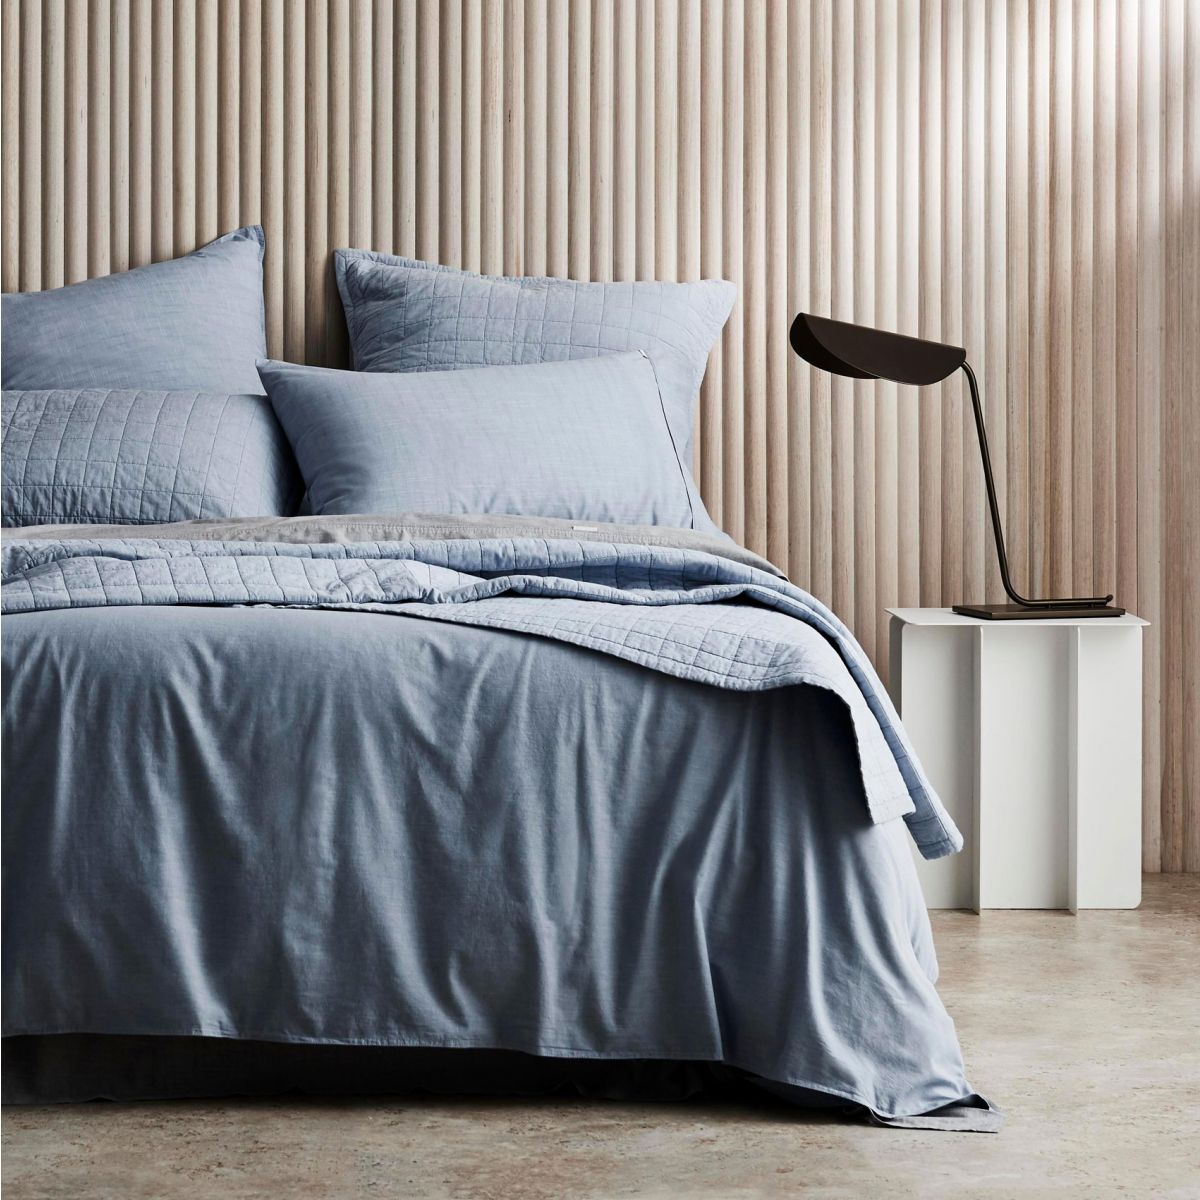 Reilly Chambray Bed Cover by Sheridan